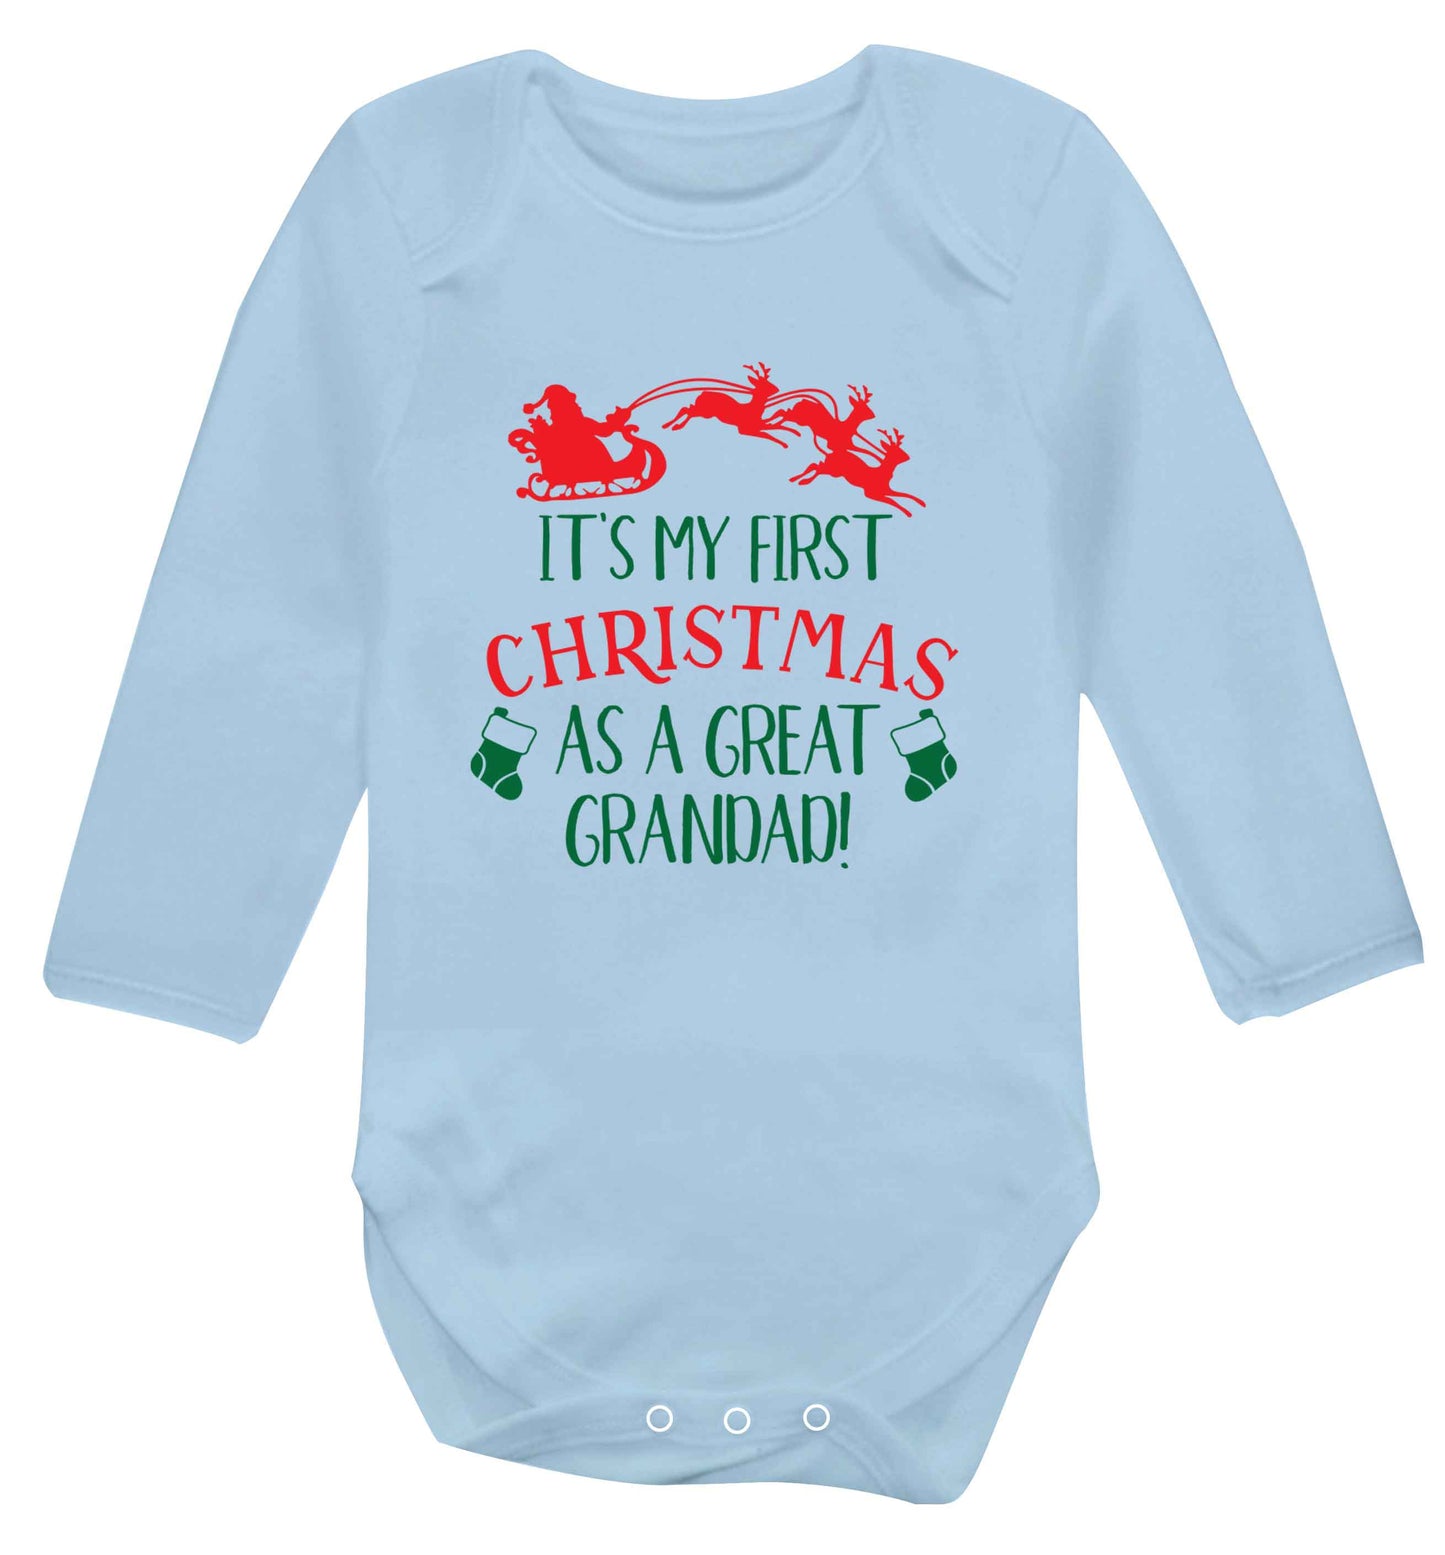 It's my first Christmas as a great grandad! Baby Vest long sleeved pale blue 6-12 months